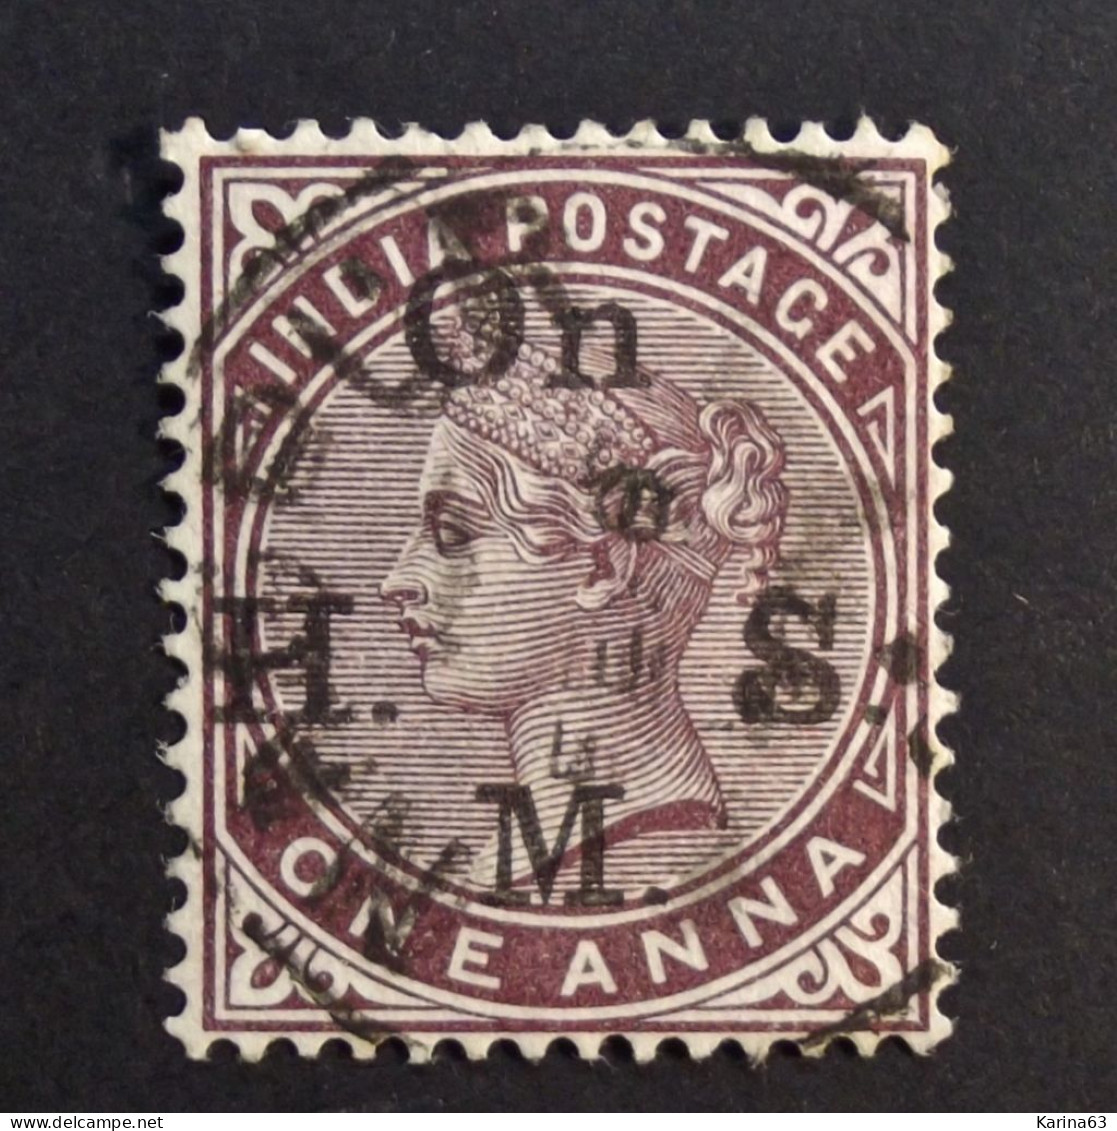 India - East India  -  Queen Victoria  -  On H M S - Watermark - One Anna - Cancelled - 1854 Compagnia Inglese Delle Indie